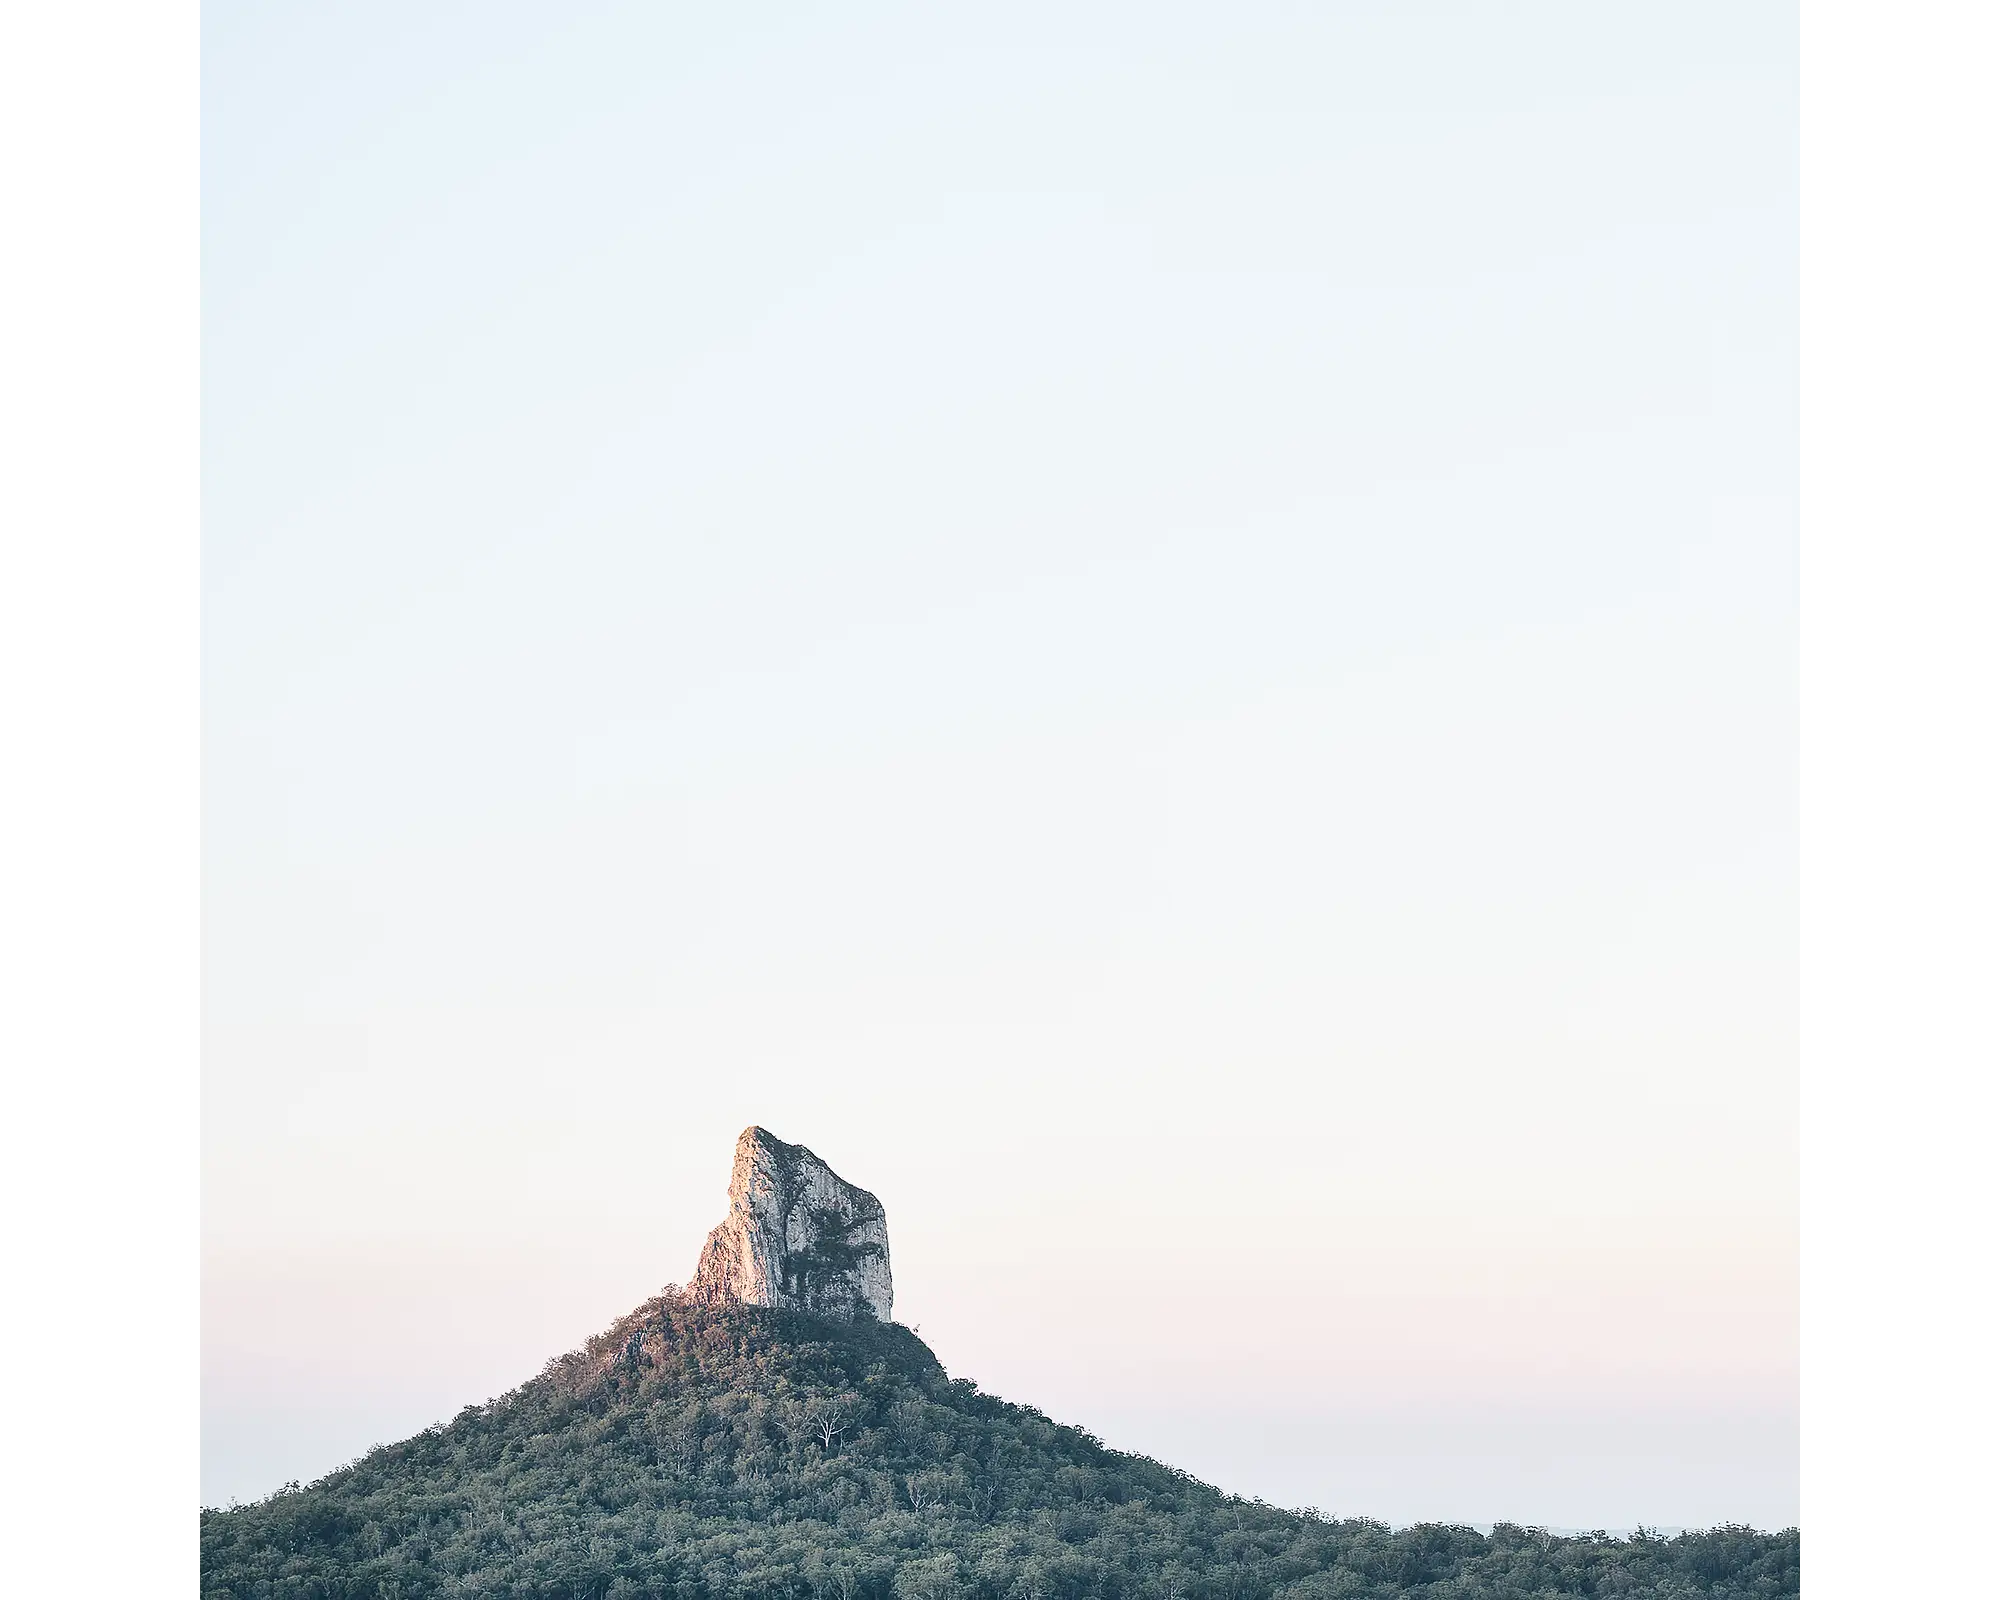 Sunset on Mount Coonowrin, Glasshouse Mountains National Park, Queensland, Australia.